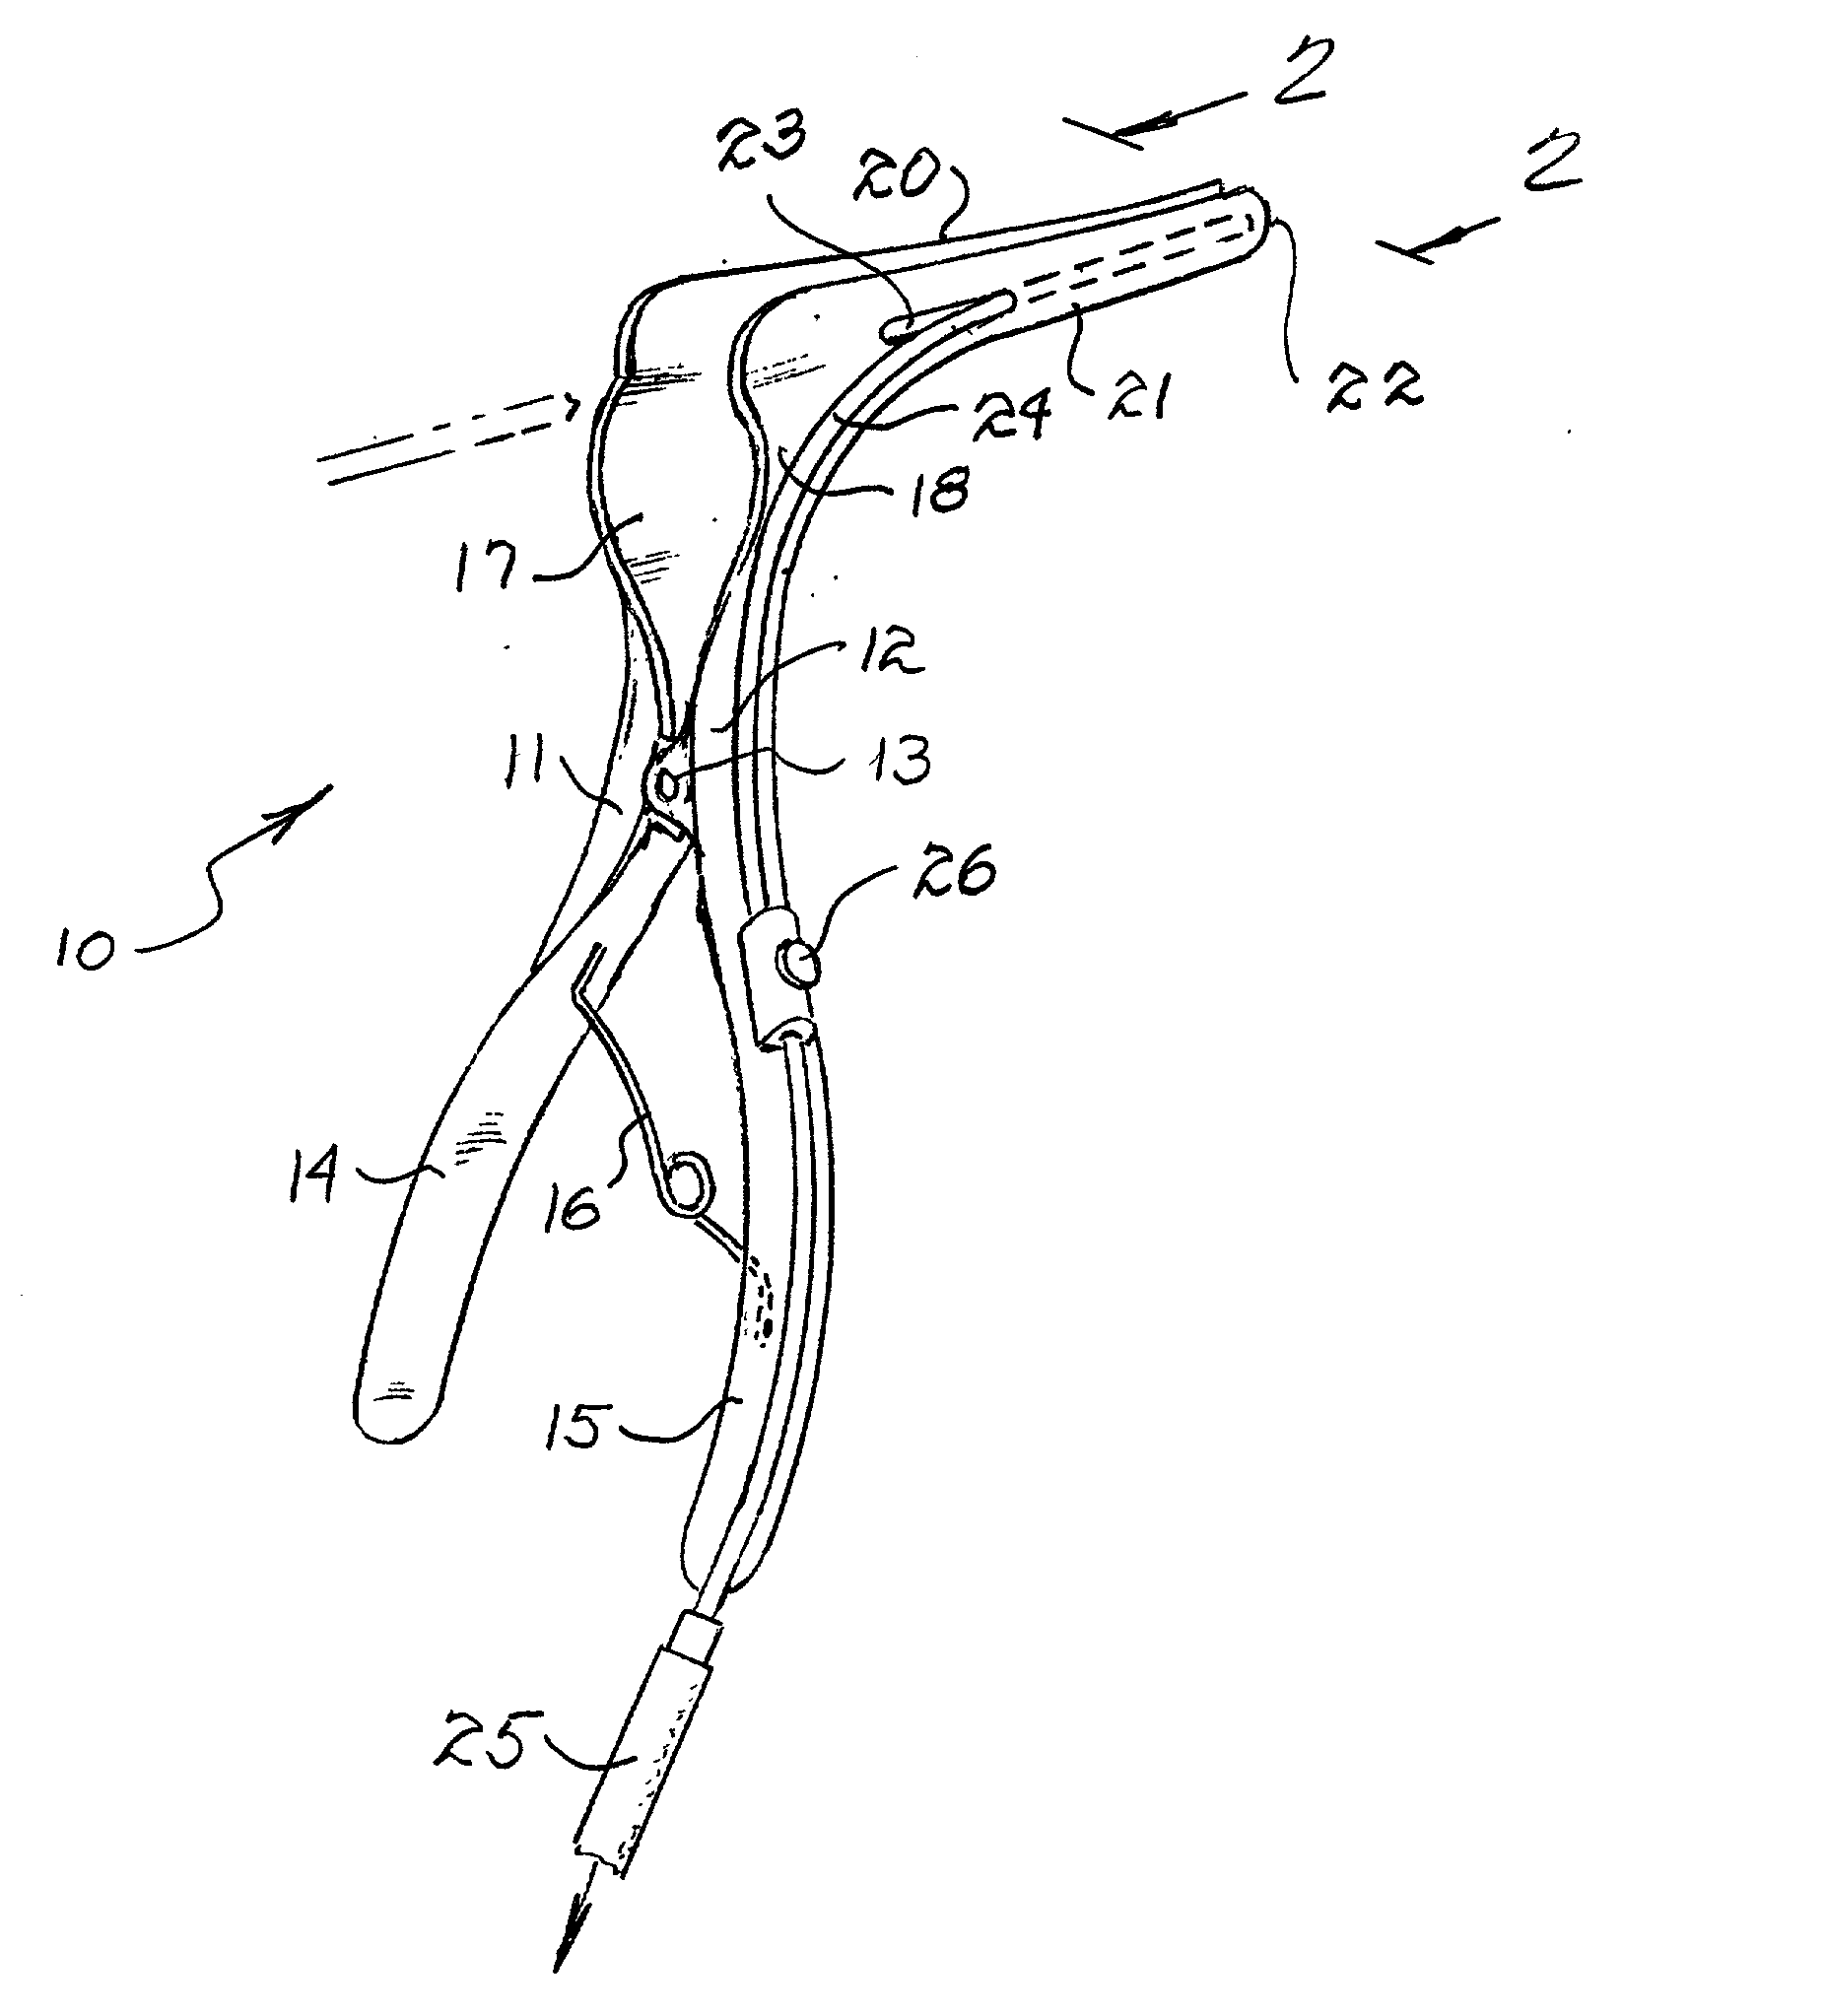 Combined nasal speculum and aspirator